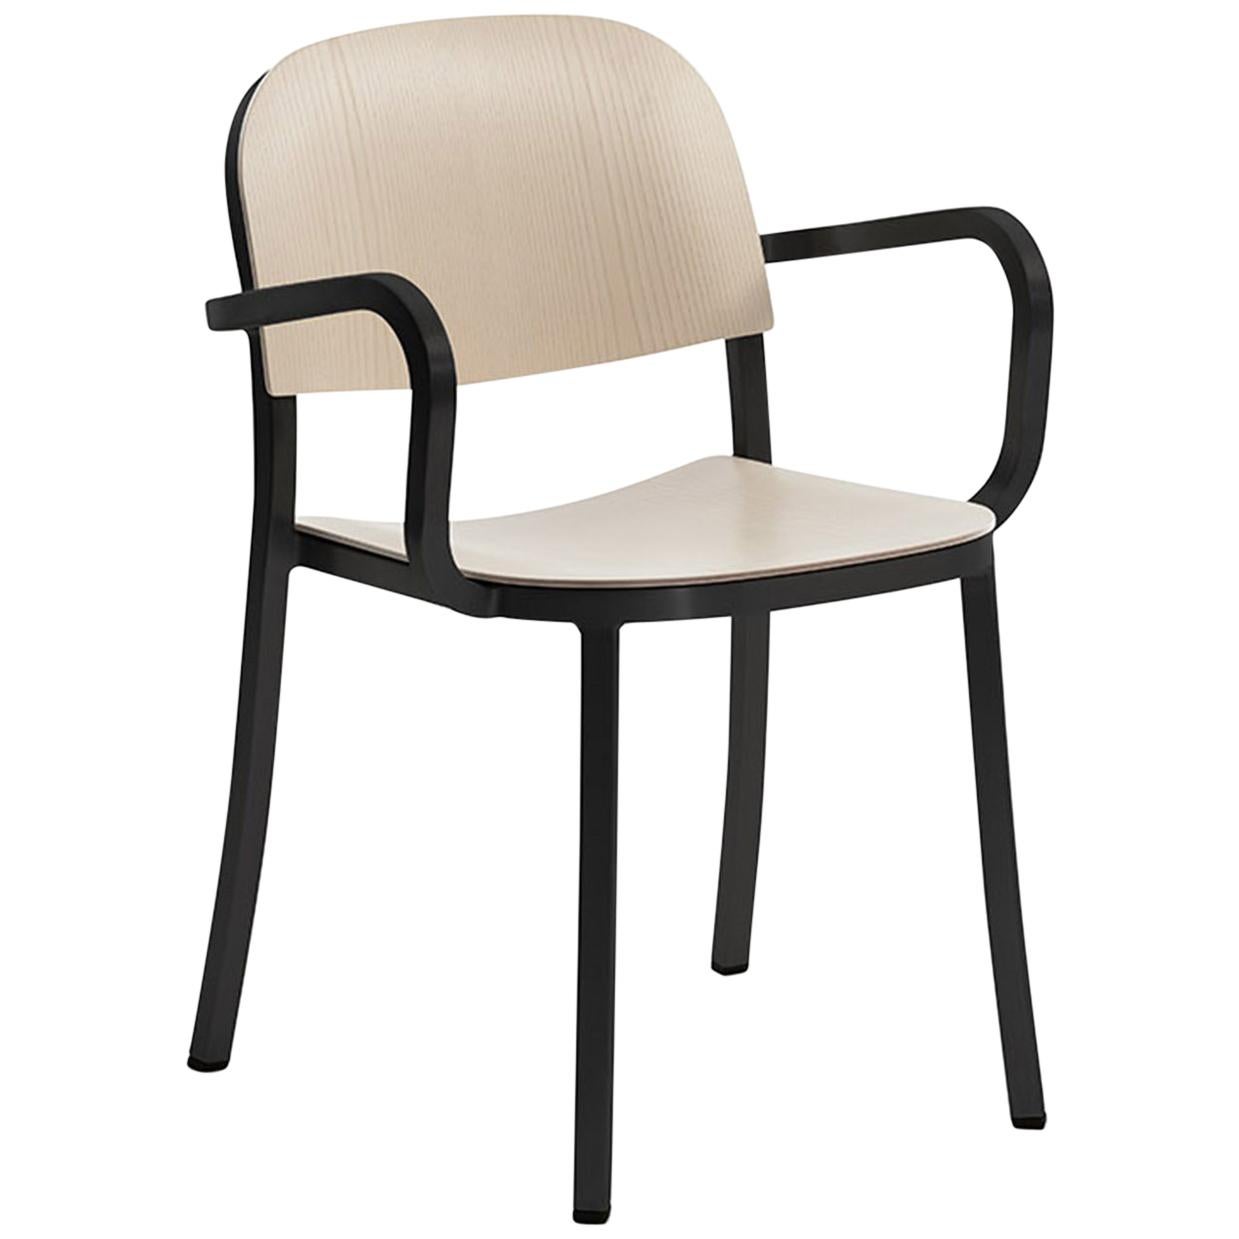 Emeco 1 Inch Armchair in Dark Powder-Coated Aluminum and Ash by Jasper Morrison